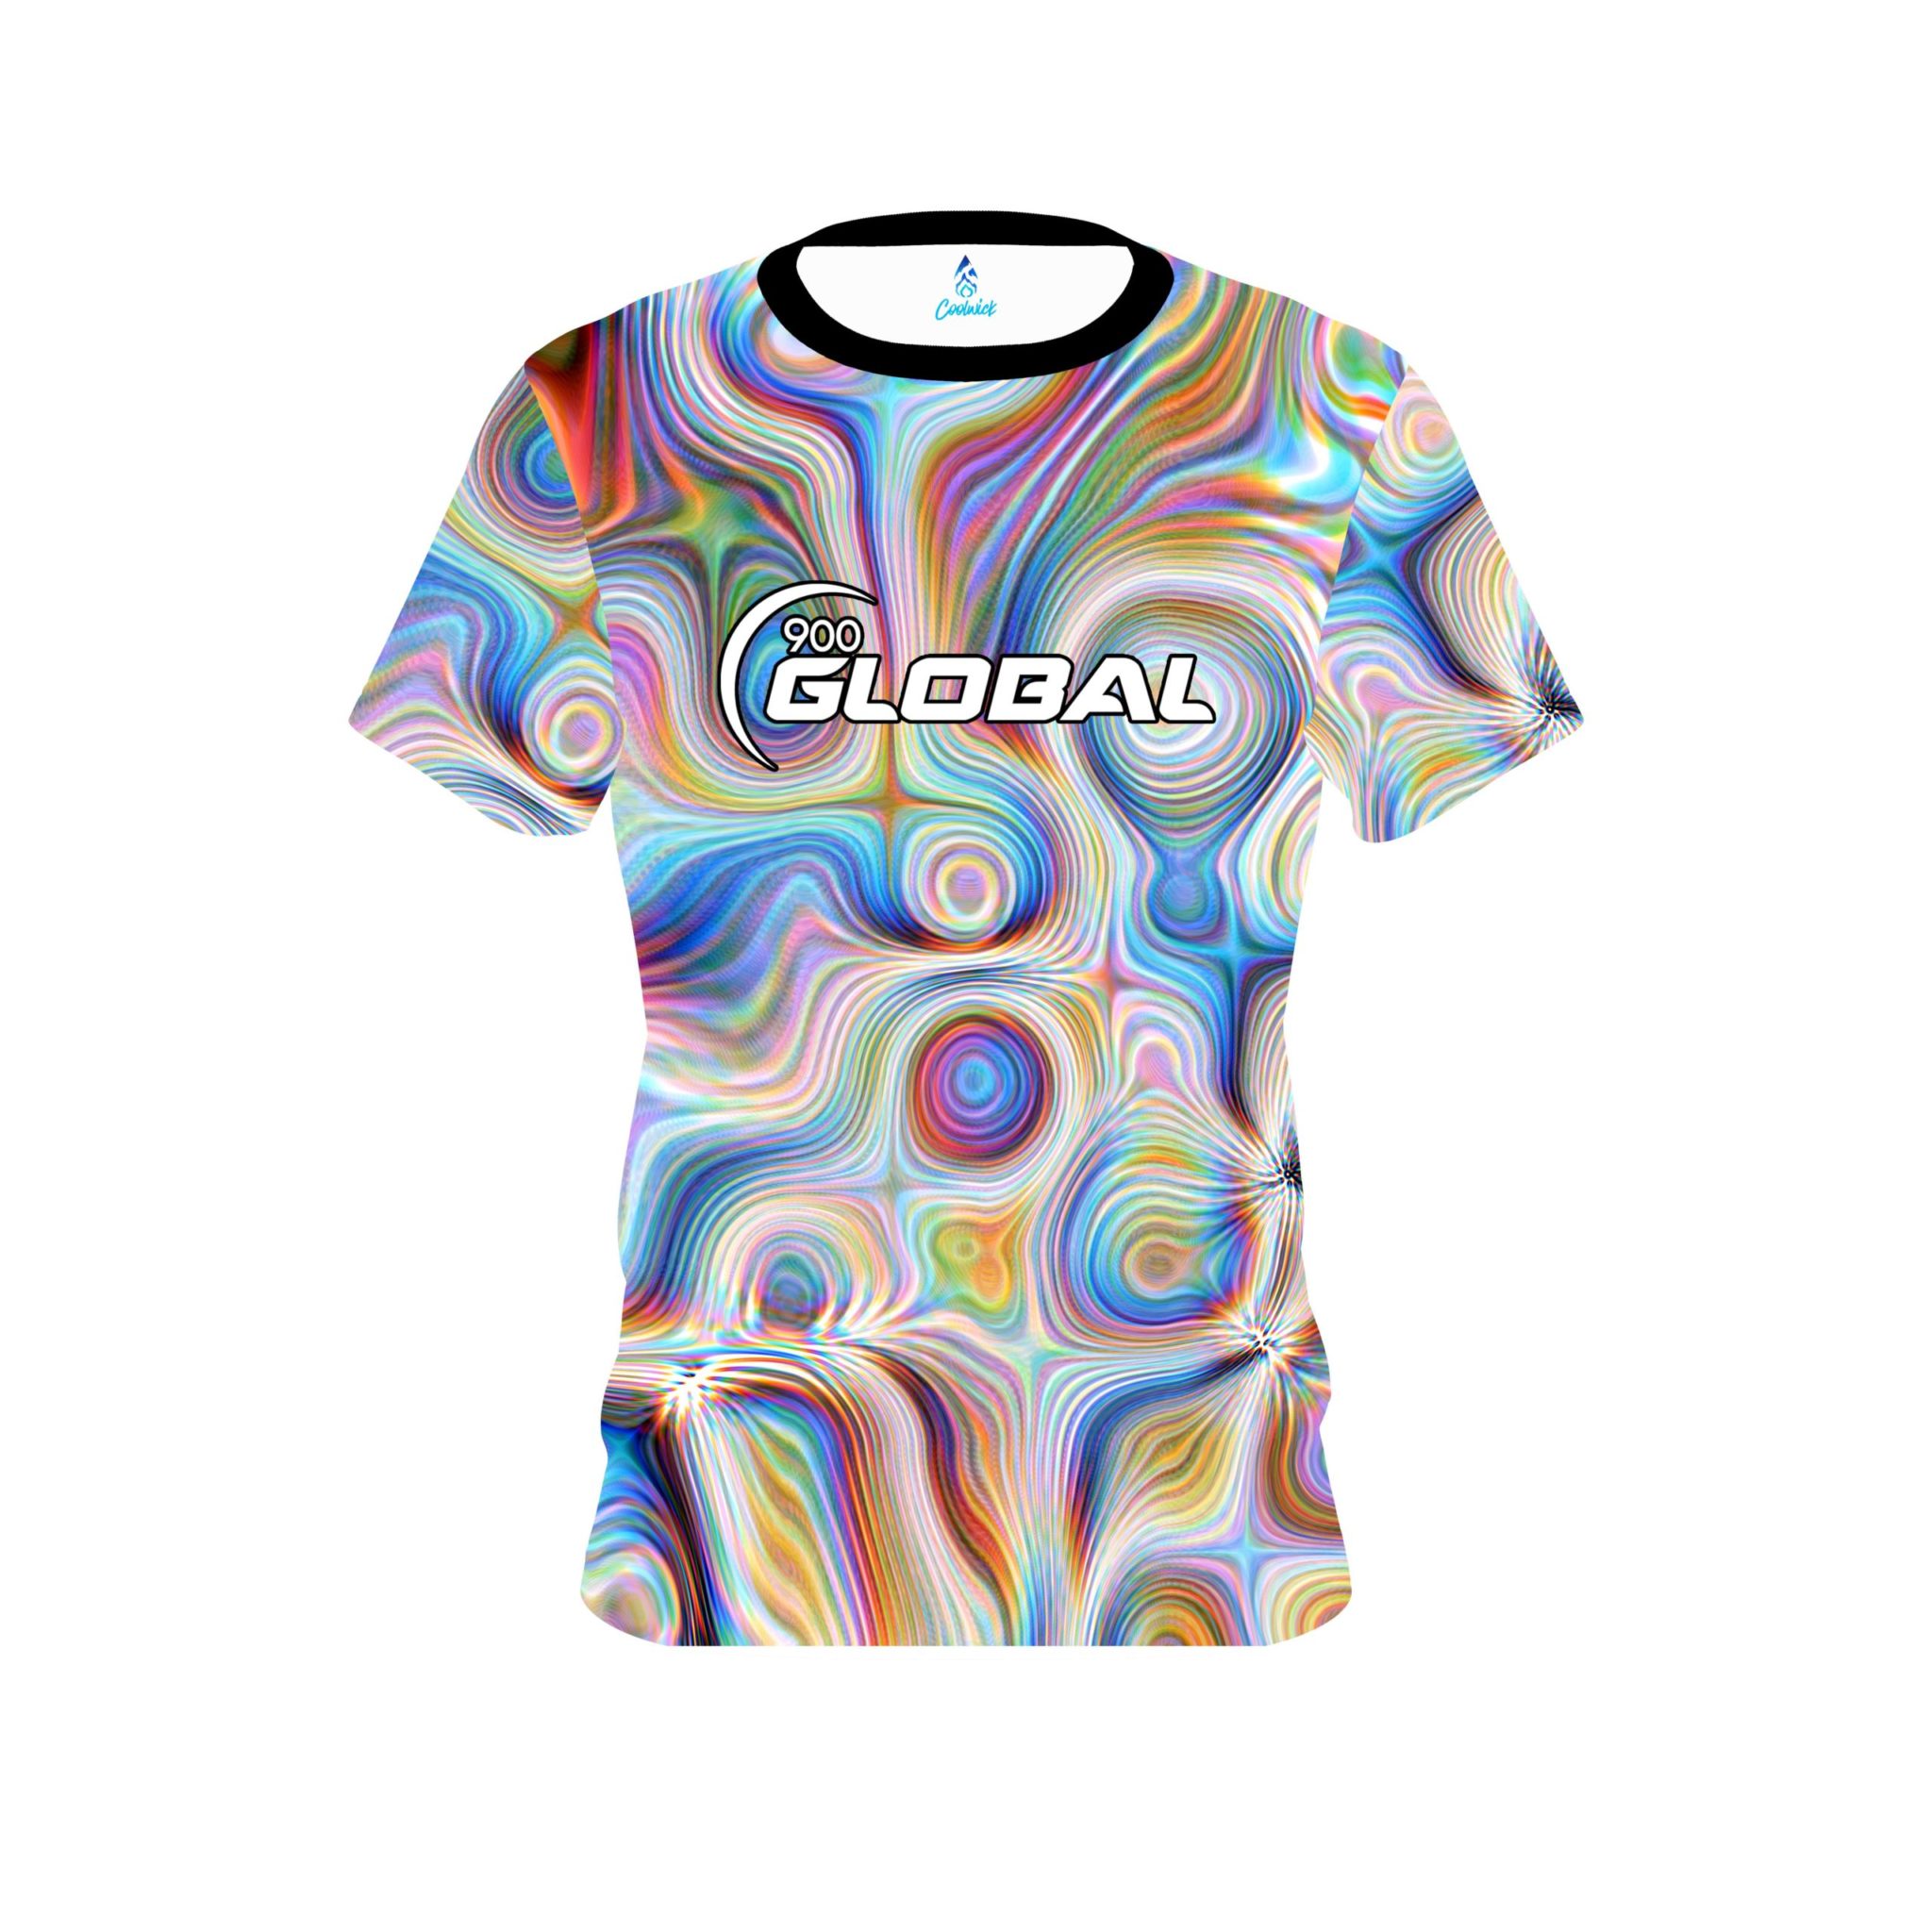 900 Global Rainbow Hallucinate CoolWick Bowling Jersey